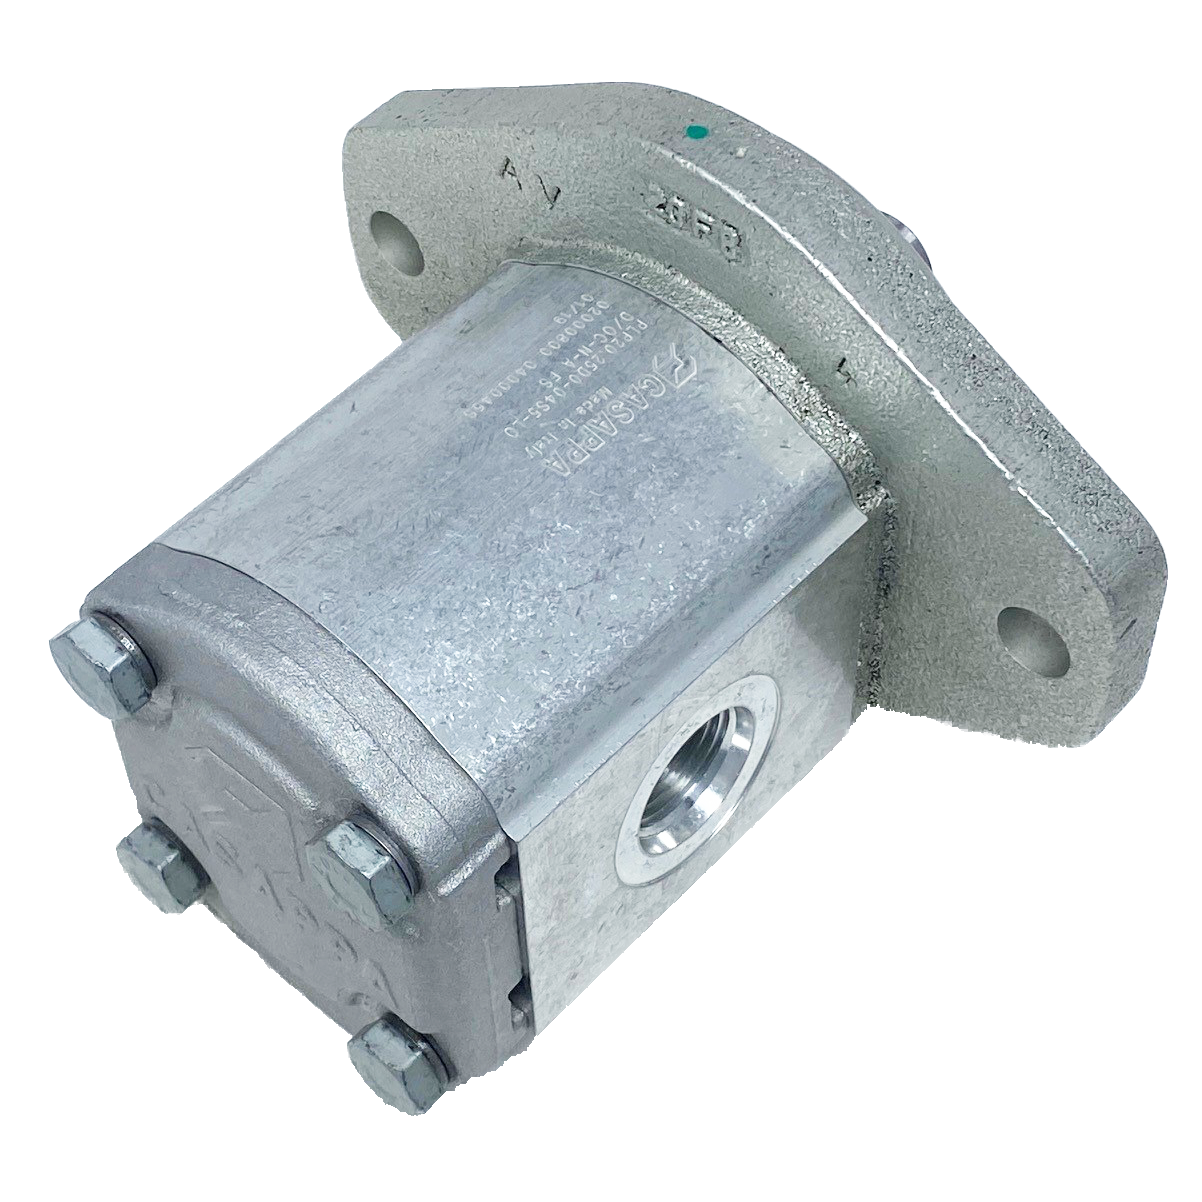 PHM20.27,8B0-32S5-LOC/OG-N-L : Casappa Polaris Gear Motor, 28.21cc, 2900psi, 2500RPM, Reversible Interior Drain, 3/4" Bore x 1/4" Key Shaft, SAE B 2-Bolt Flange, 0.625 (5/8") #10 SAE In, 1.25" #20 SAE Out, Cast Iron Body Cast Iron Flange And Cover